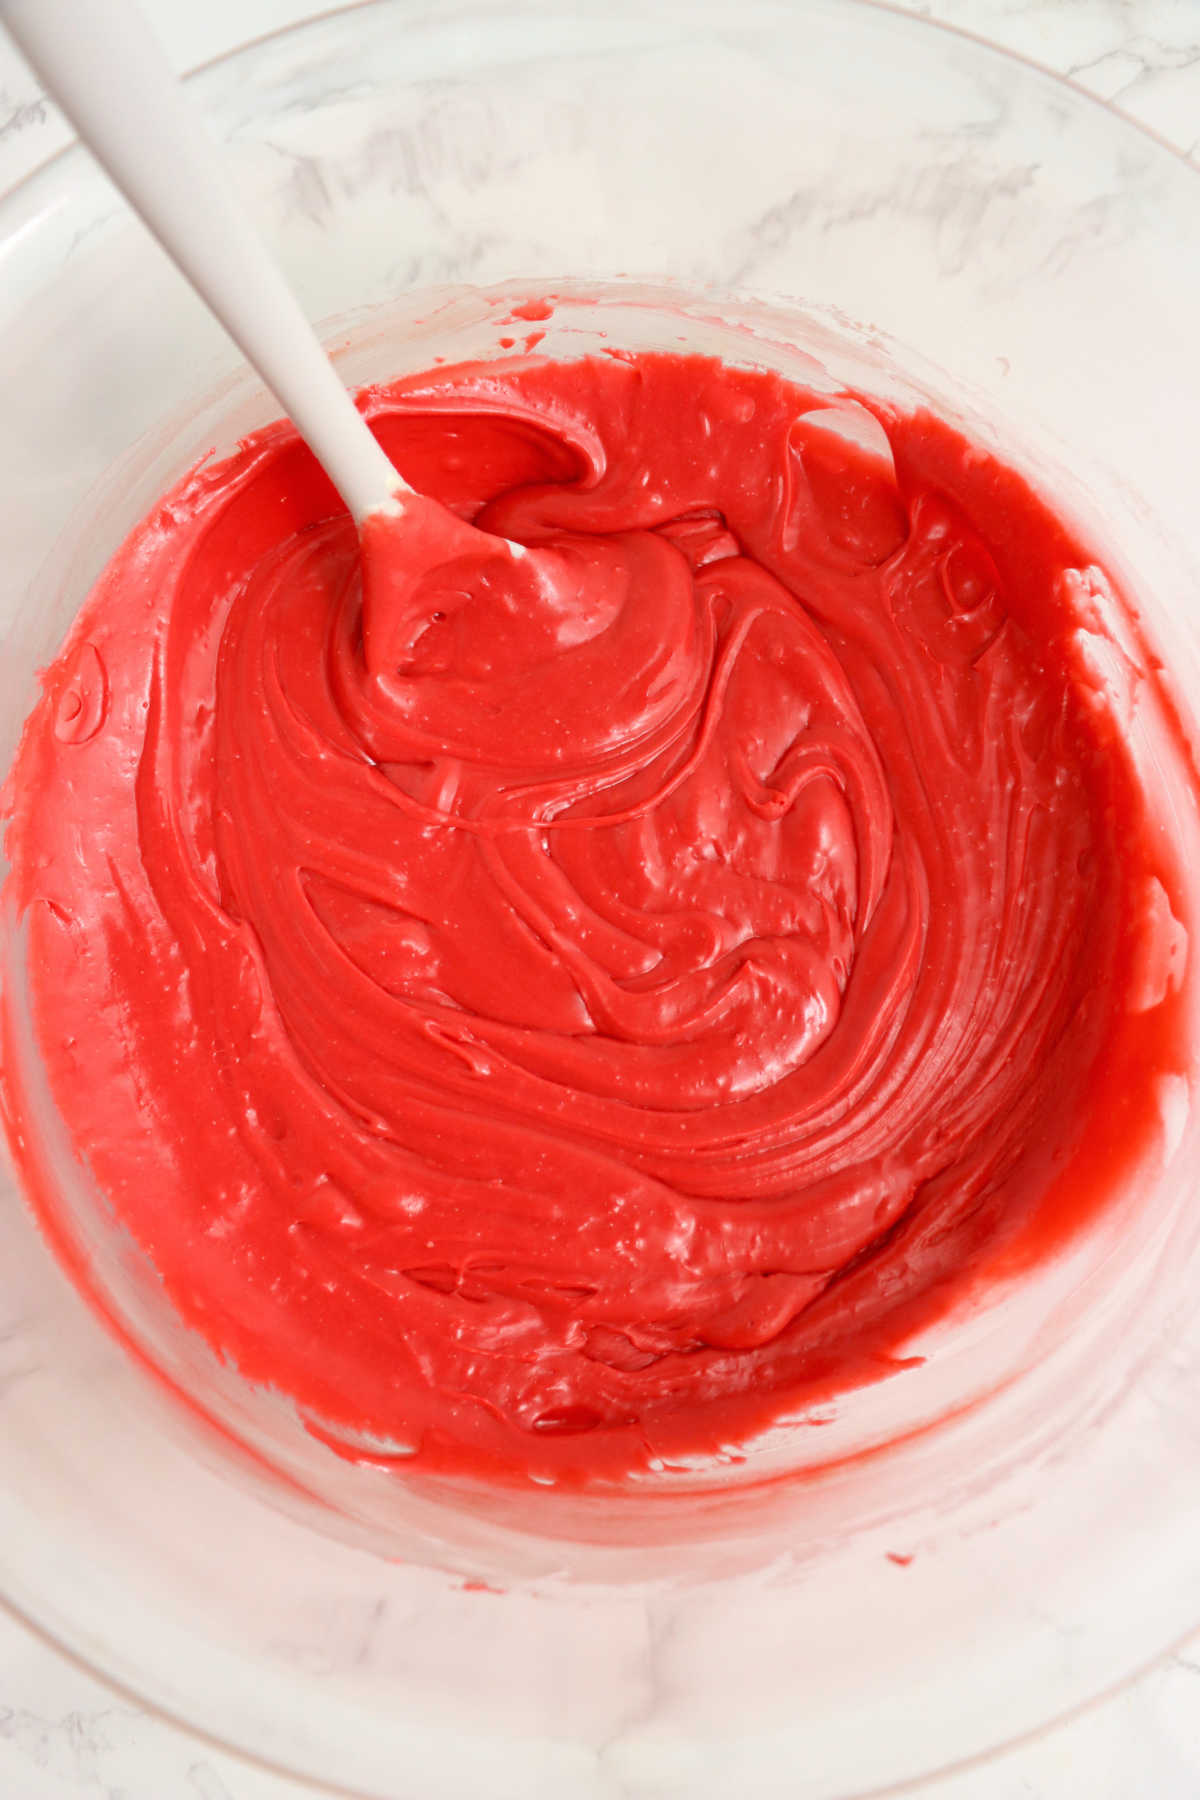 Red velvet cake mix stirred into melted chocolate making a smooth bright red mixture.